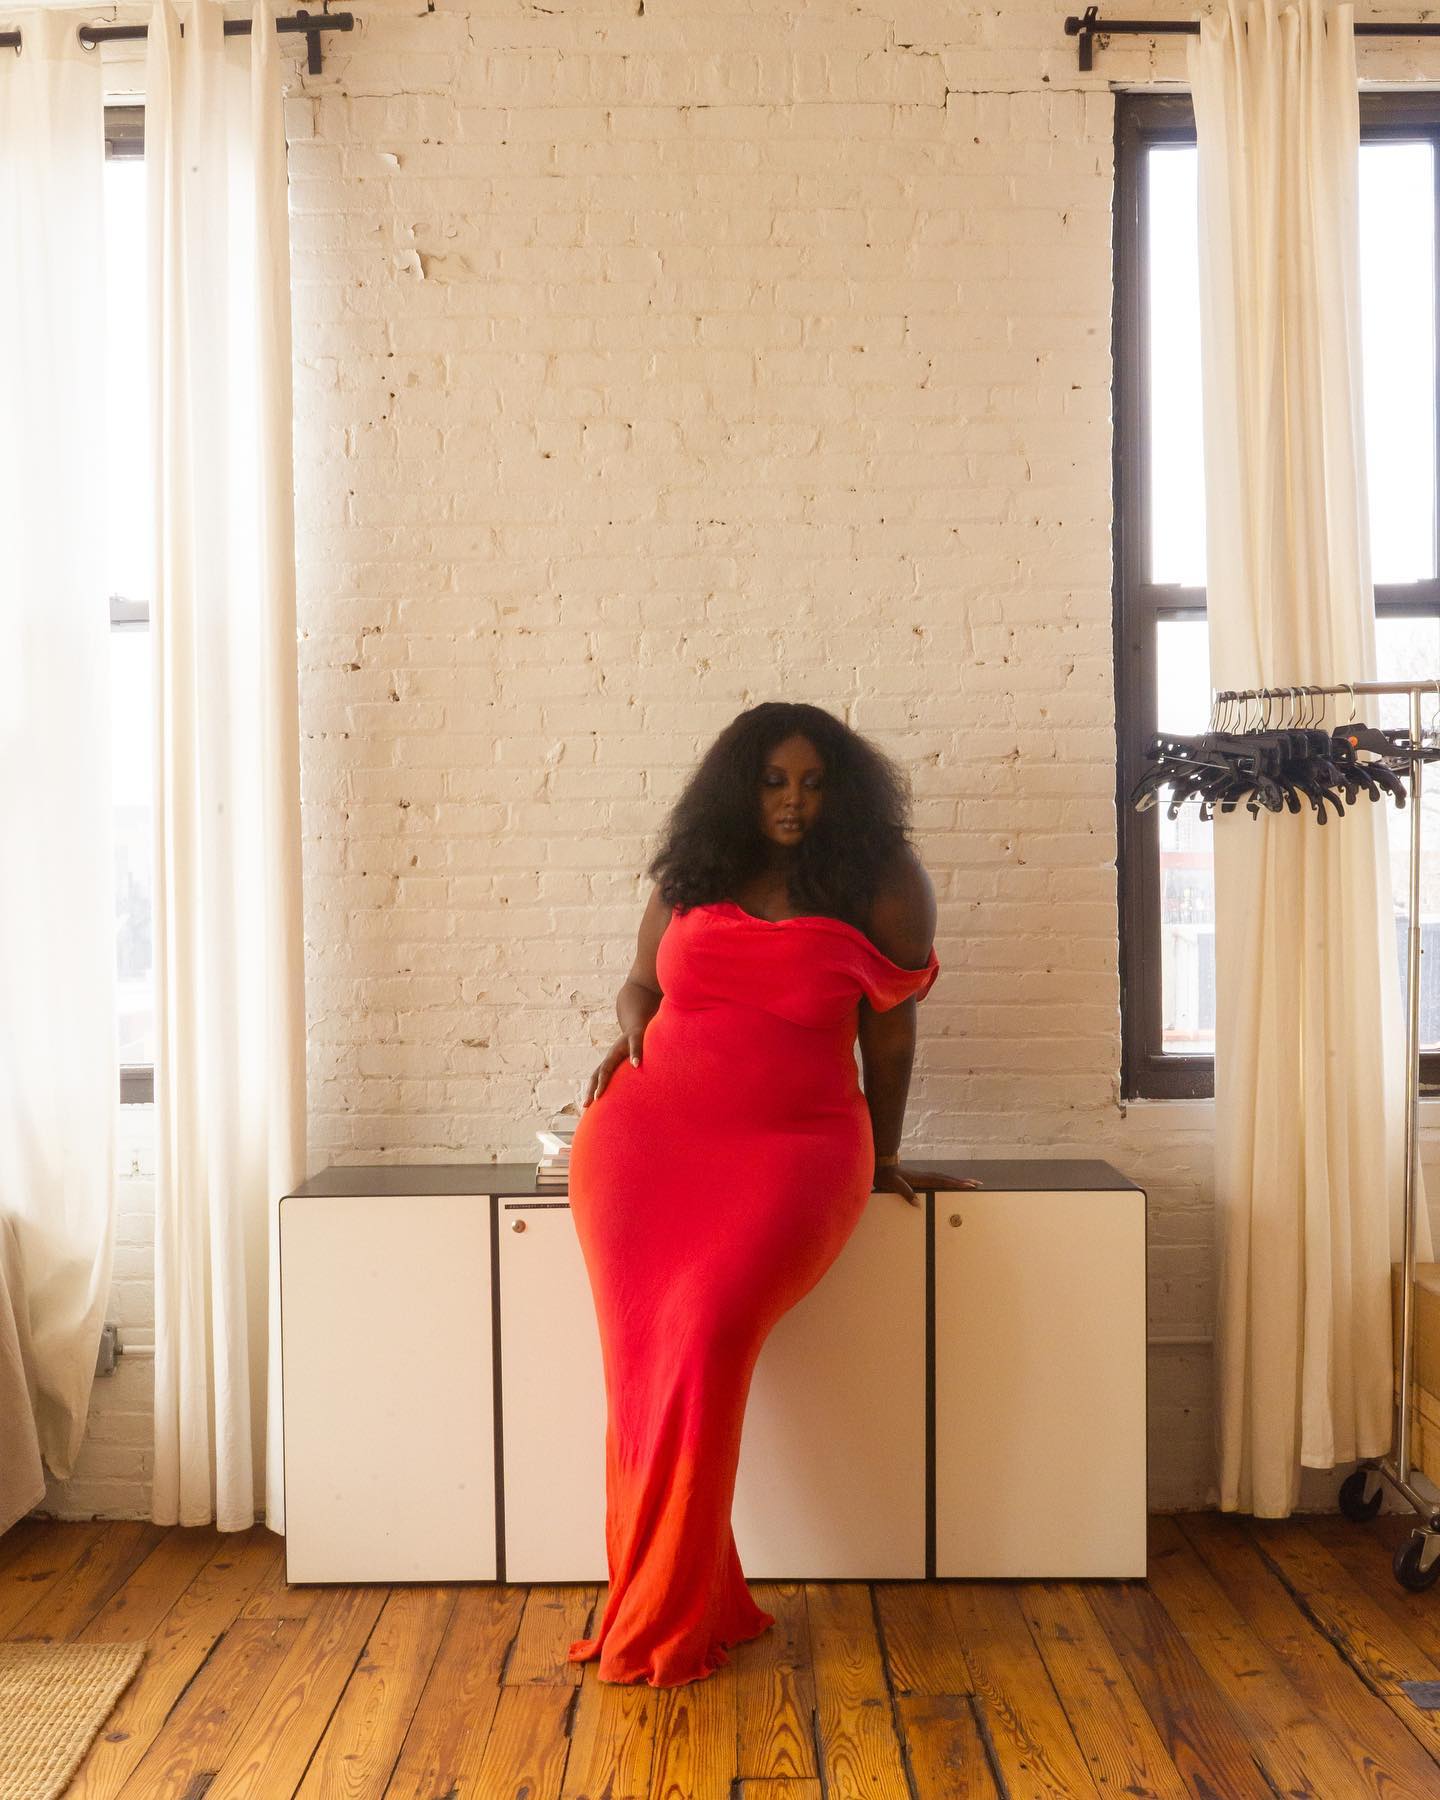 Why Black Influencers Simi Moonlight and NYCxClothes Are Leaning Into Authentic Storytelling